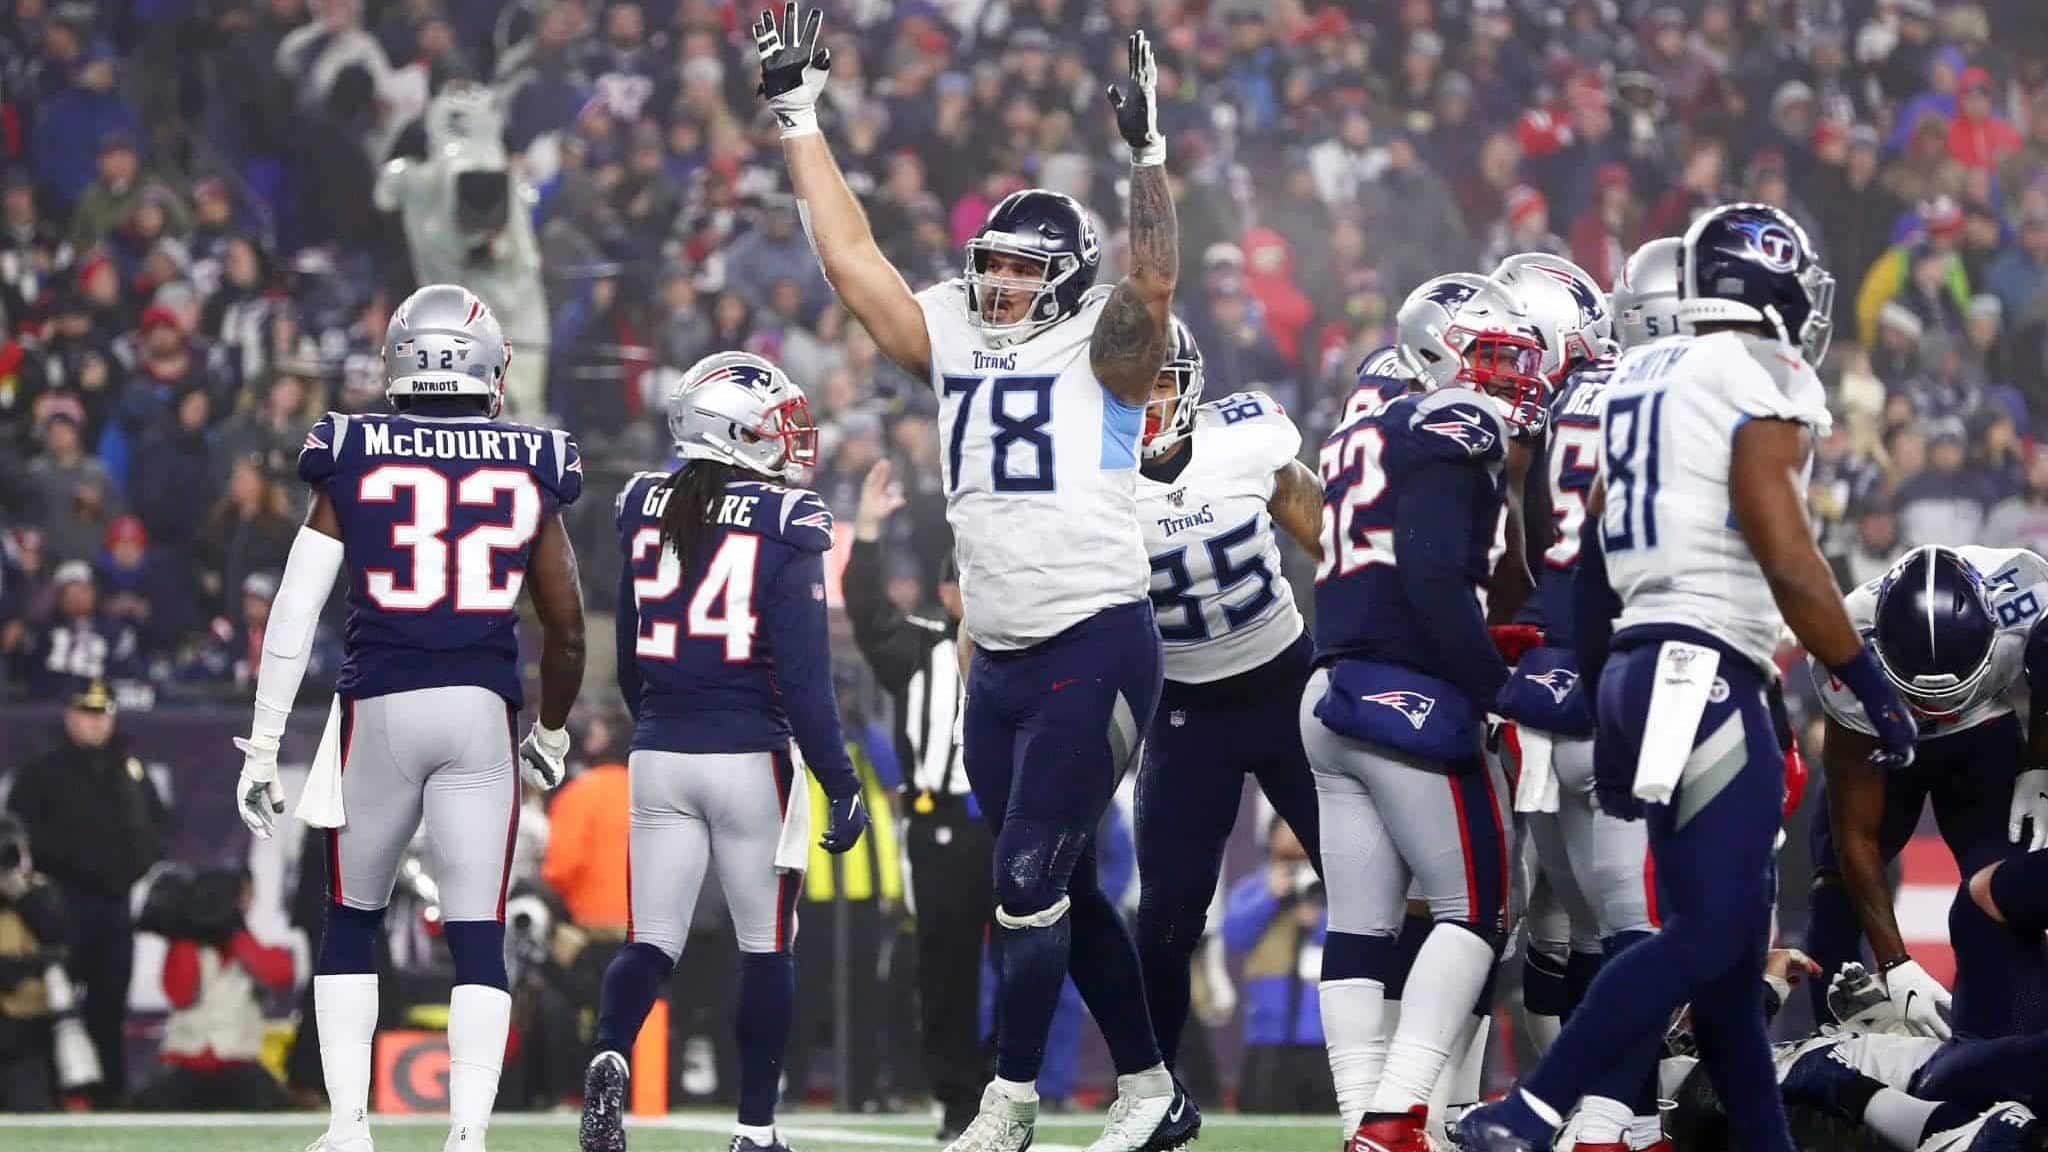 FOXBOROUGH, MASSACHUSETTS - JANUARY 04: Jack Conklin #78 of the Tennessee Titans reacts as they take on the New England Patriots in the first half o the AFC Wild Card Playoff game at Gillette Stadium on January 04, 2020 in Foxborough, Massachusetts. The Tennessee Titans won 20-13.